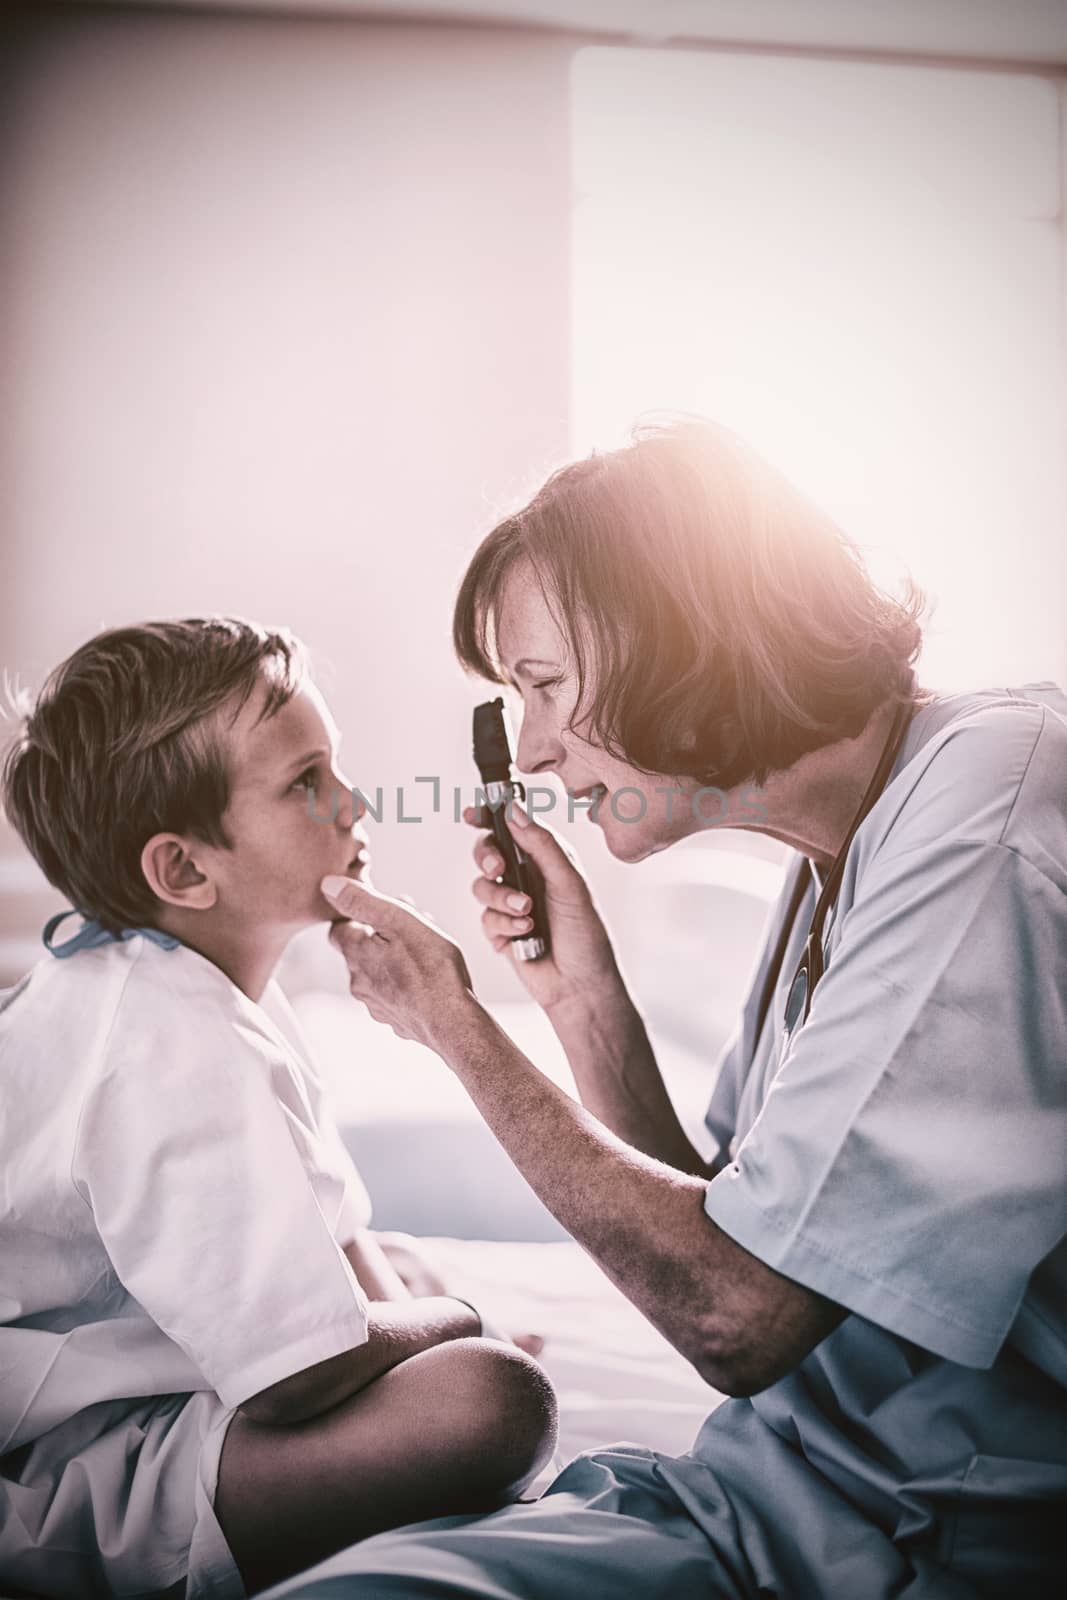 Female doctor examining patient with ophthalmic device at hospital